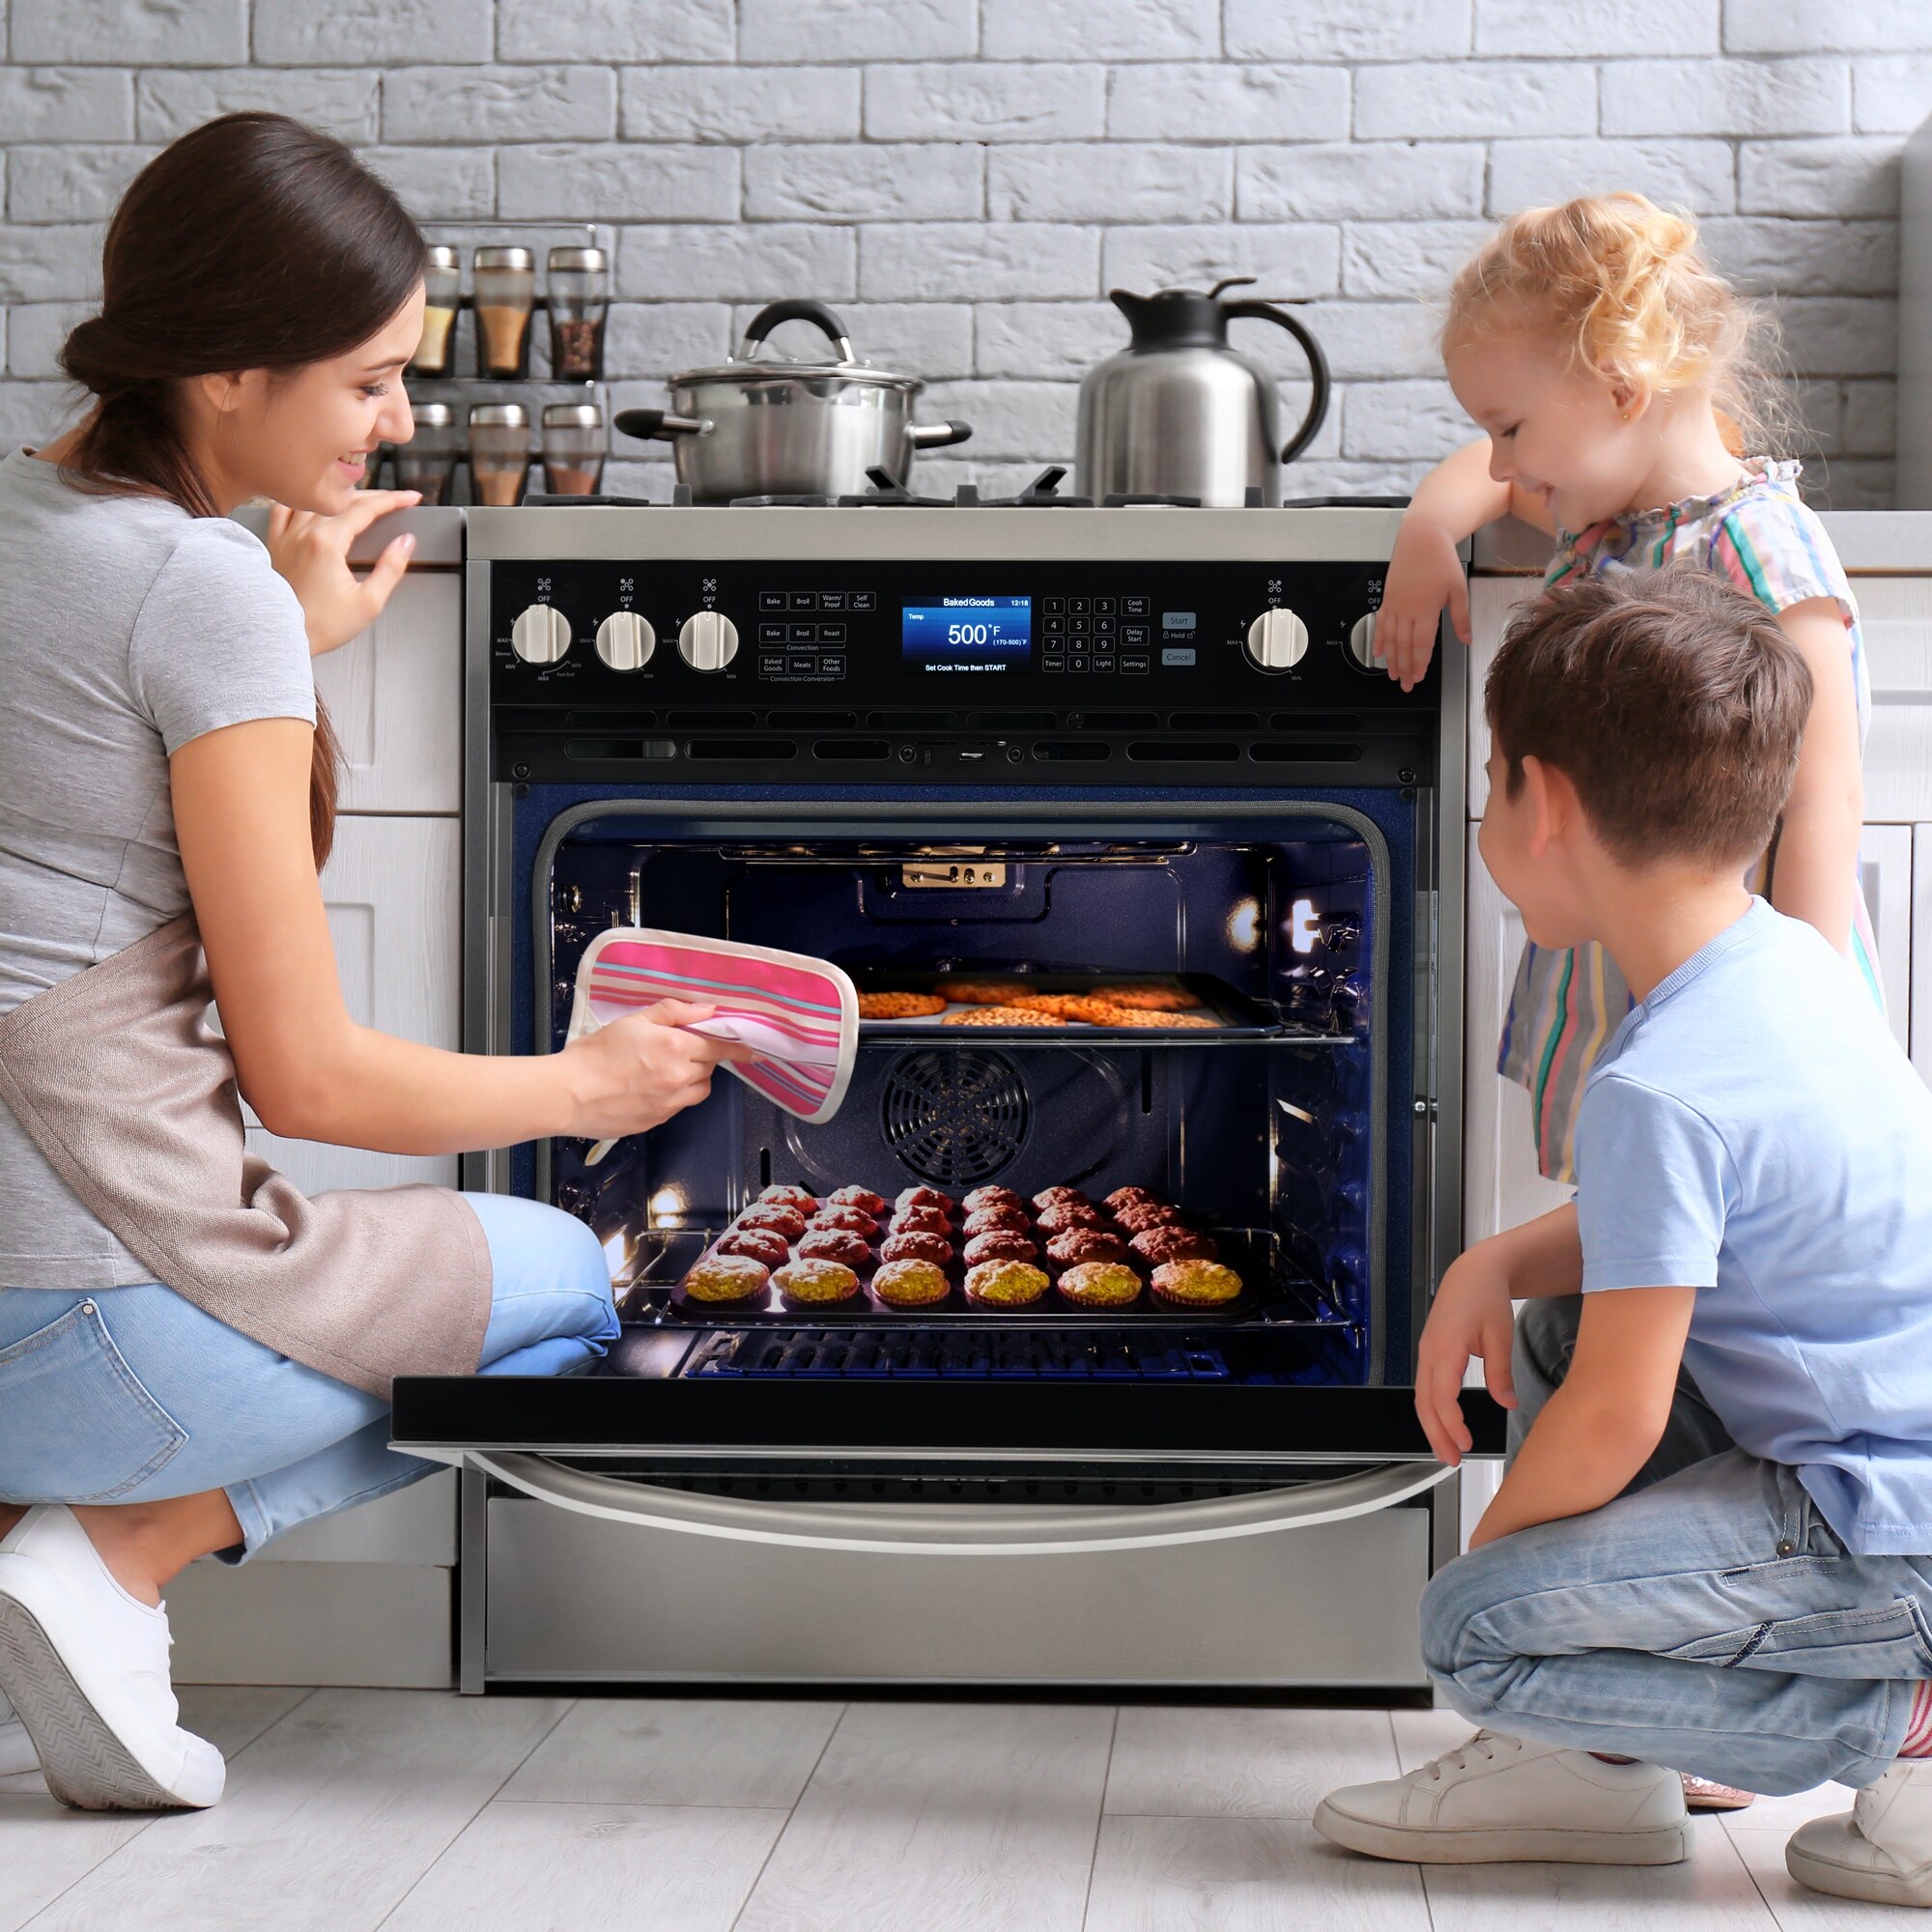 ft Commercial-Style 30 in 5 cu Single Oven Dual Fuel Range with 7 Function Convection Oven in Stainless Steel 